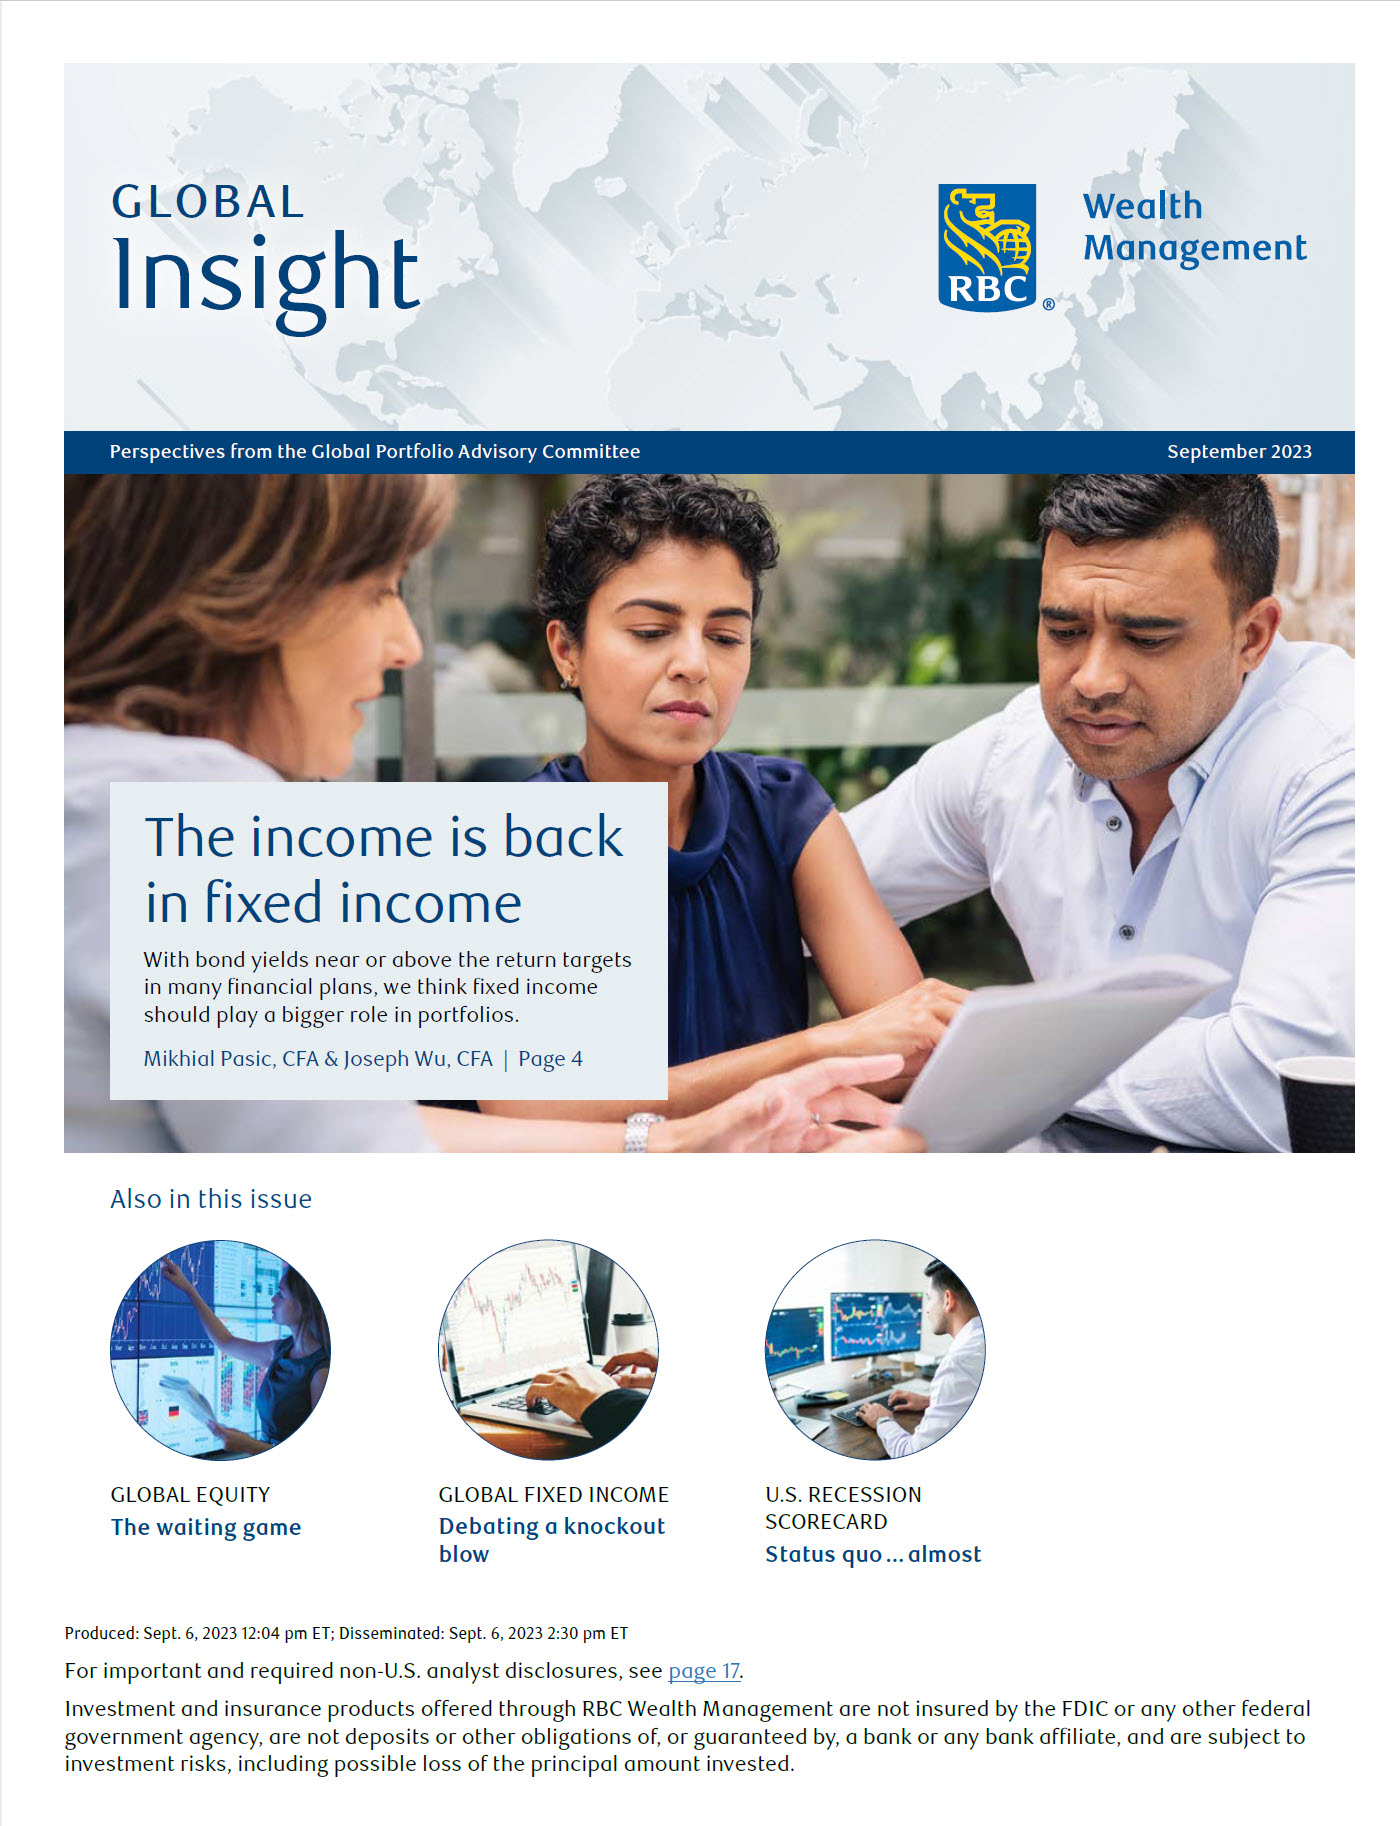 Global Insight 2023 Midyear Outlook pdf cover